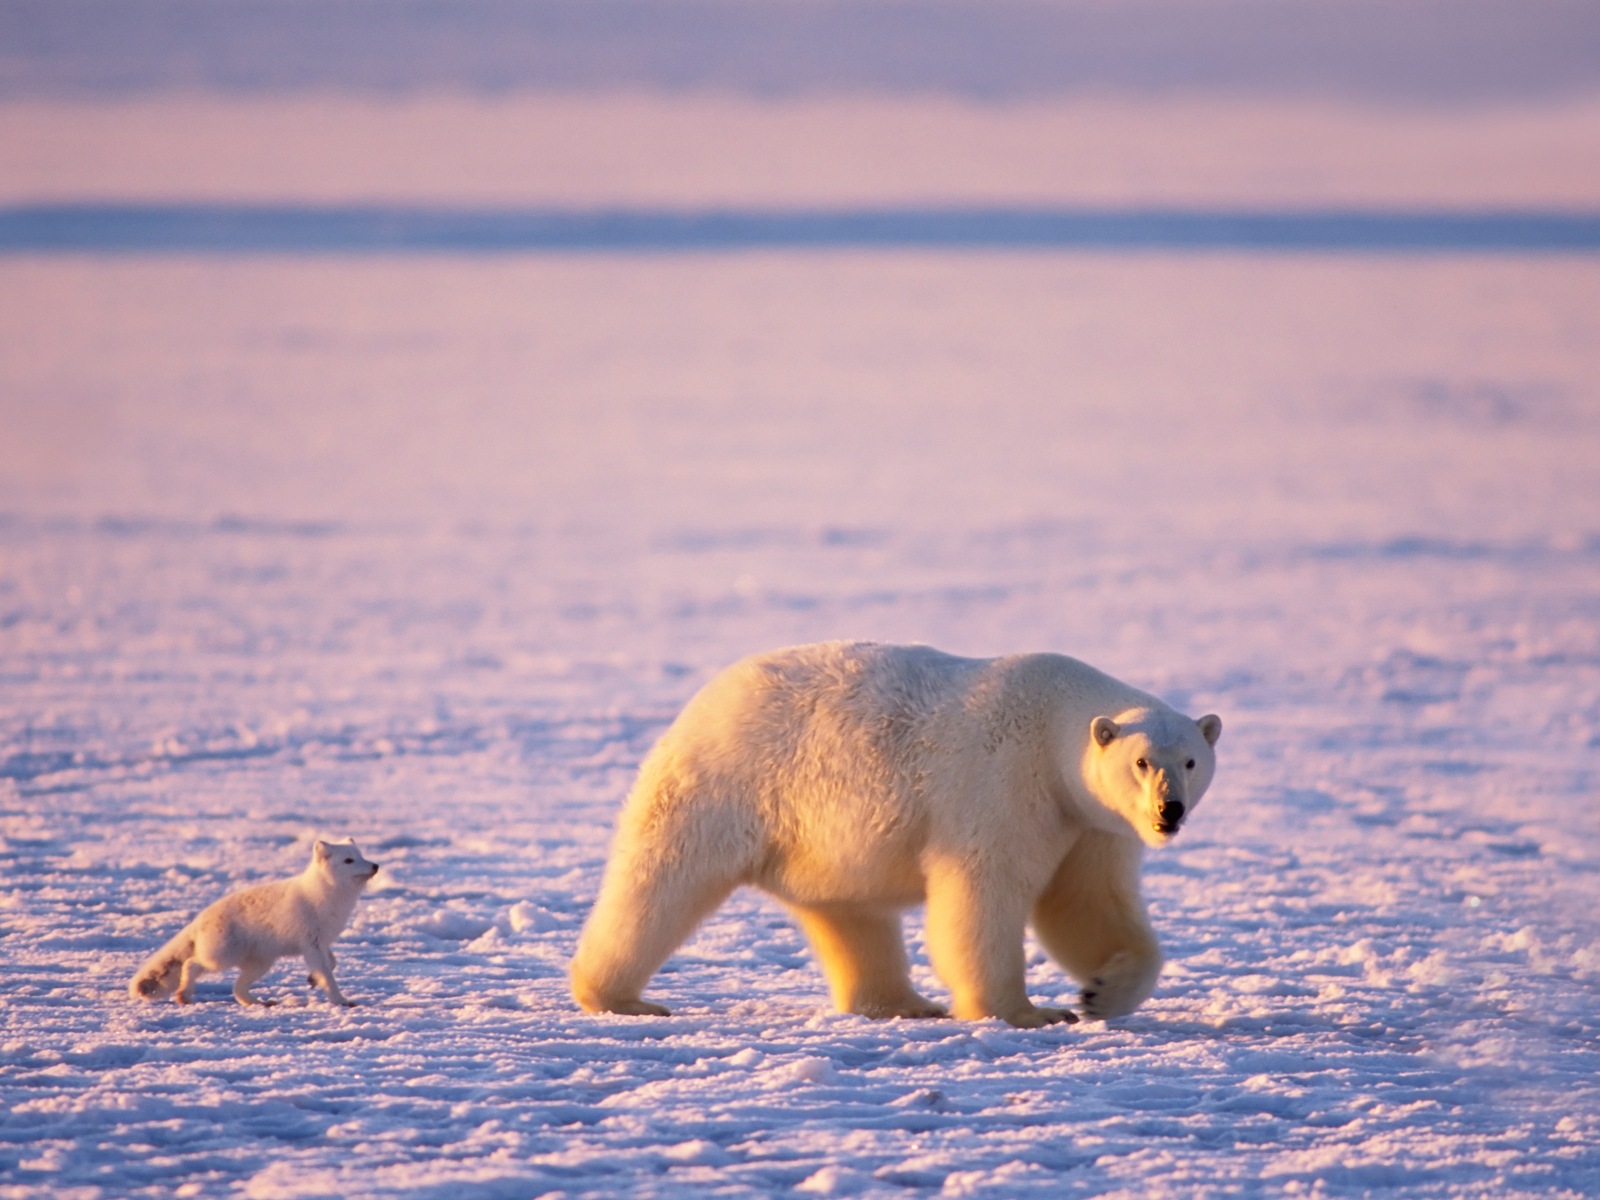 Windows 8 Wallpapers: Arctic, the nature ecological landscape, arctic animals #10 - 1600x1200